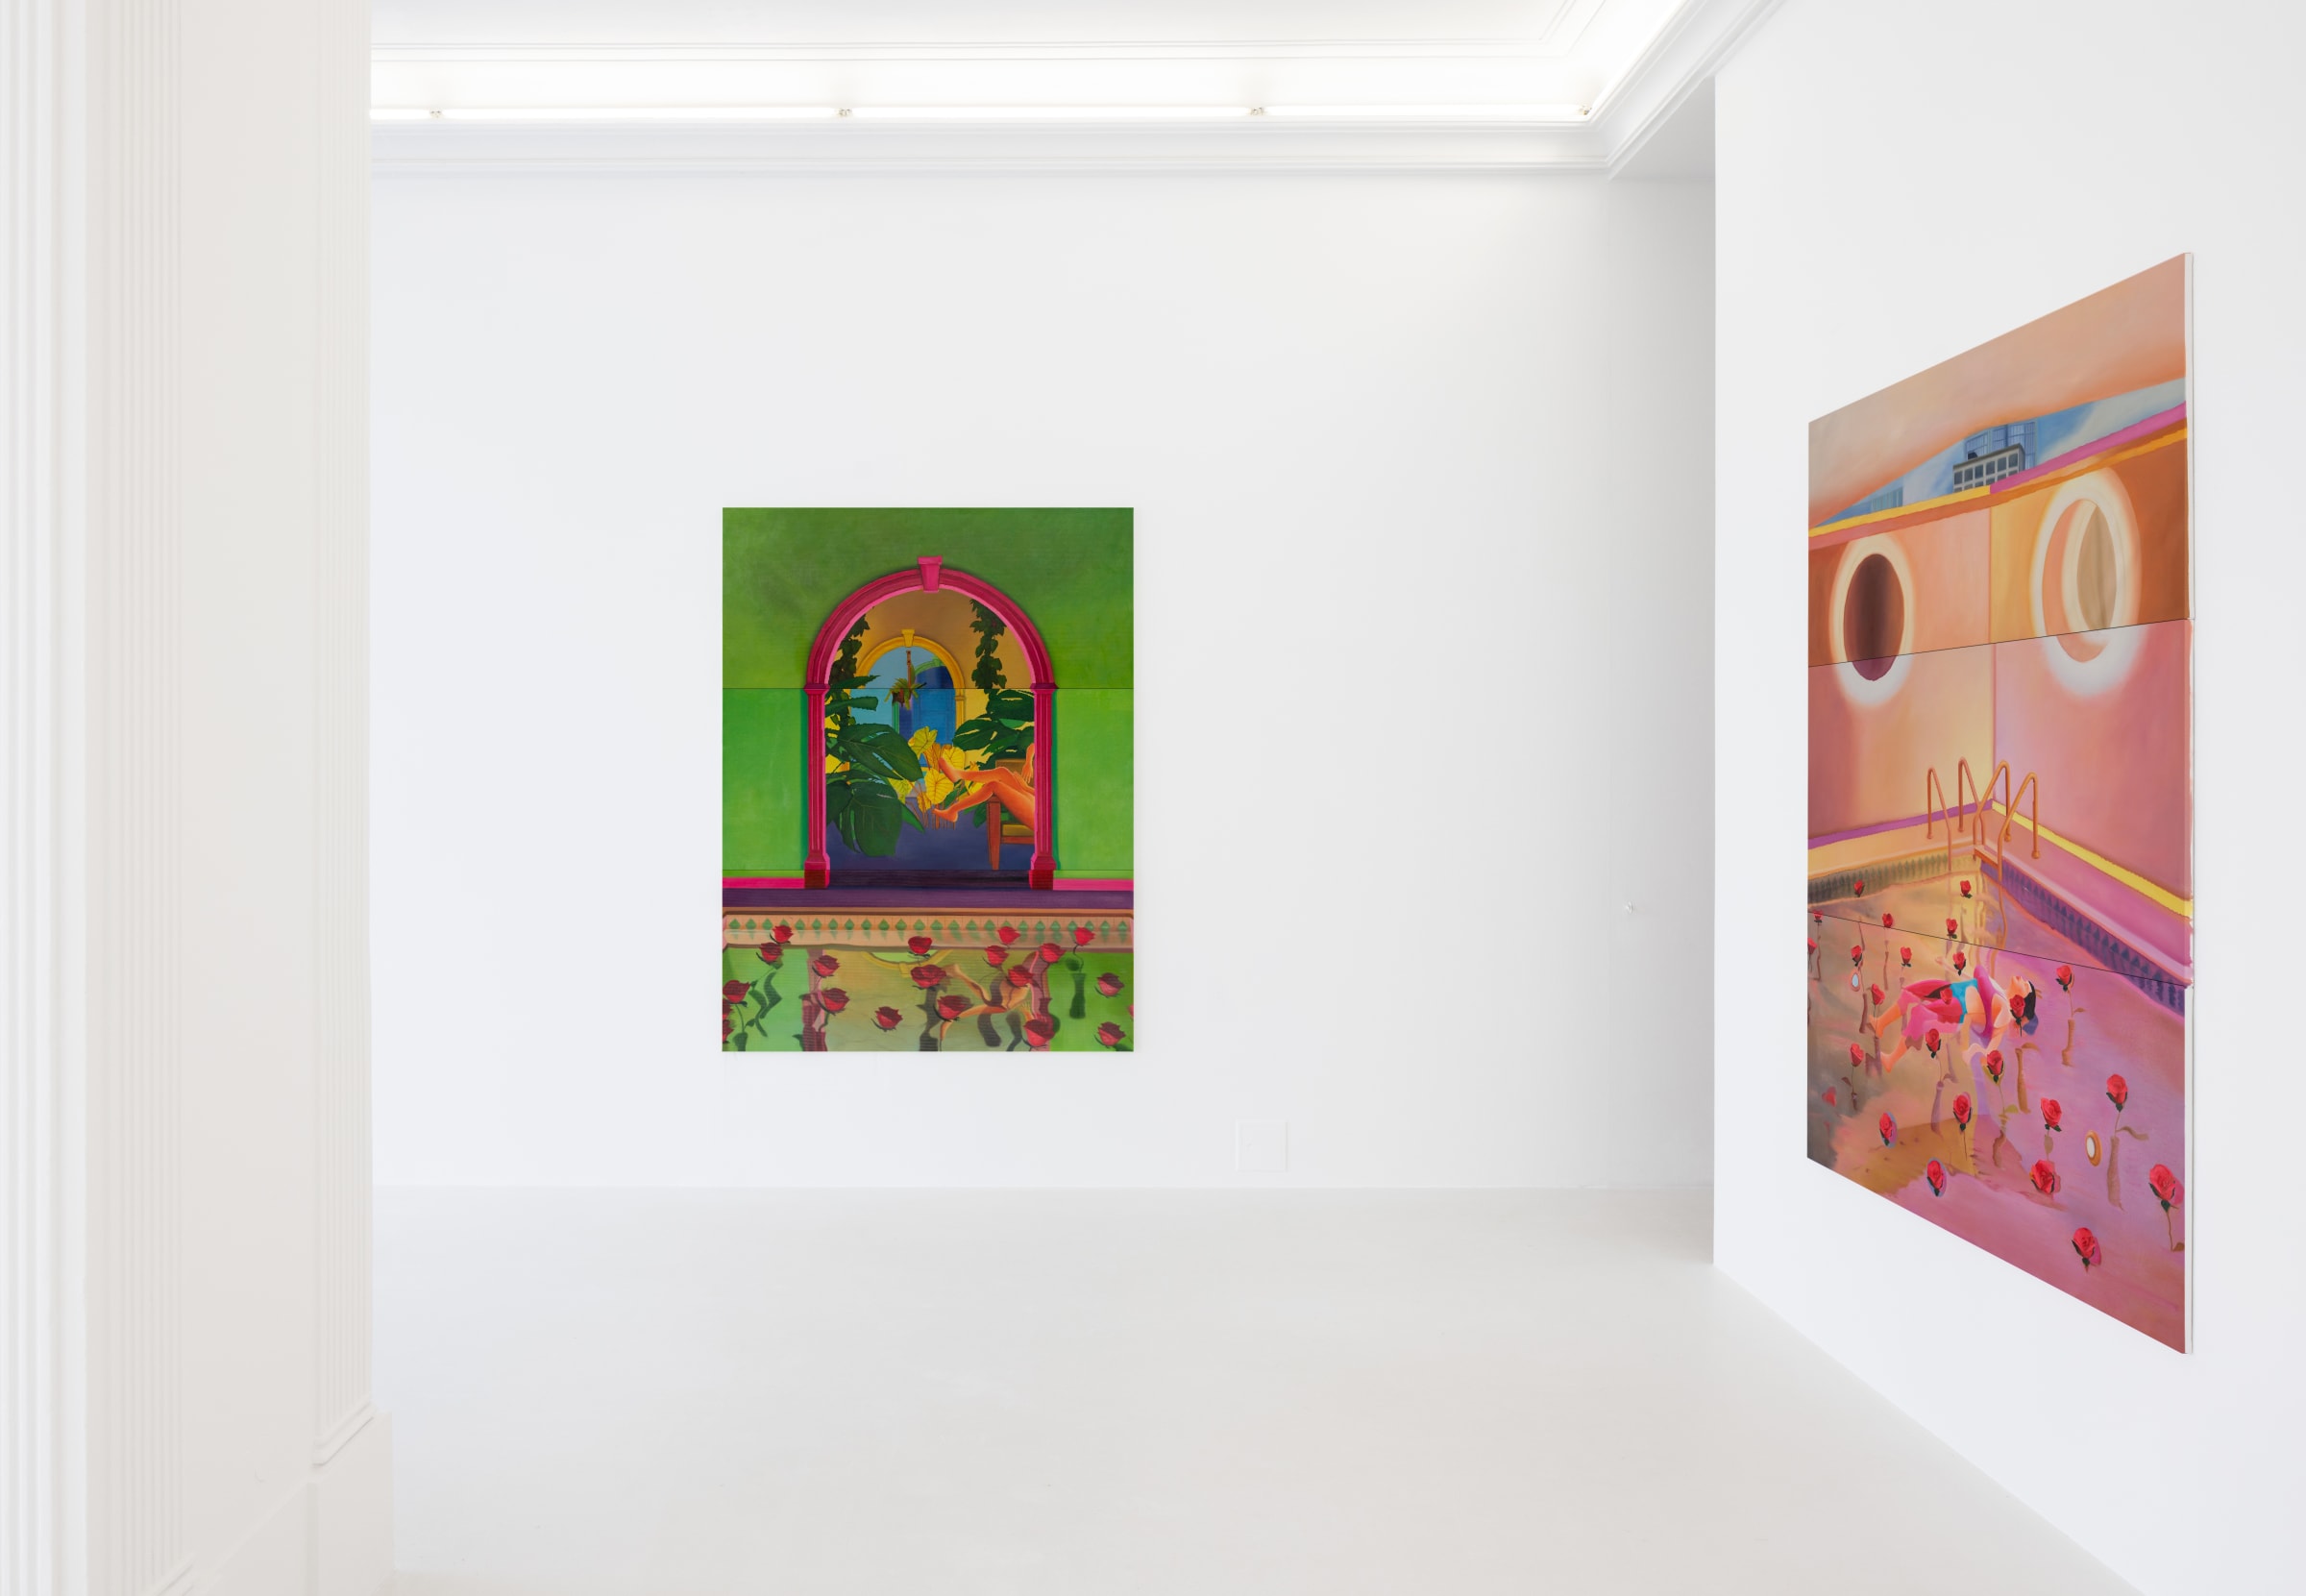 Mak2 Love Pool Installation View March 24 – April 21, 2023 Peres Projects, Berlin Photographed by: Timo Ohler